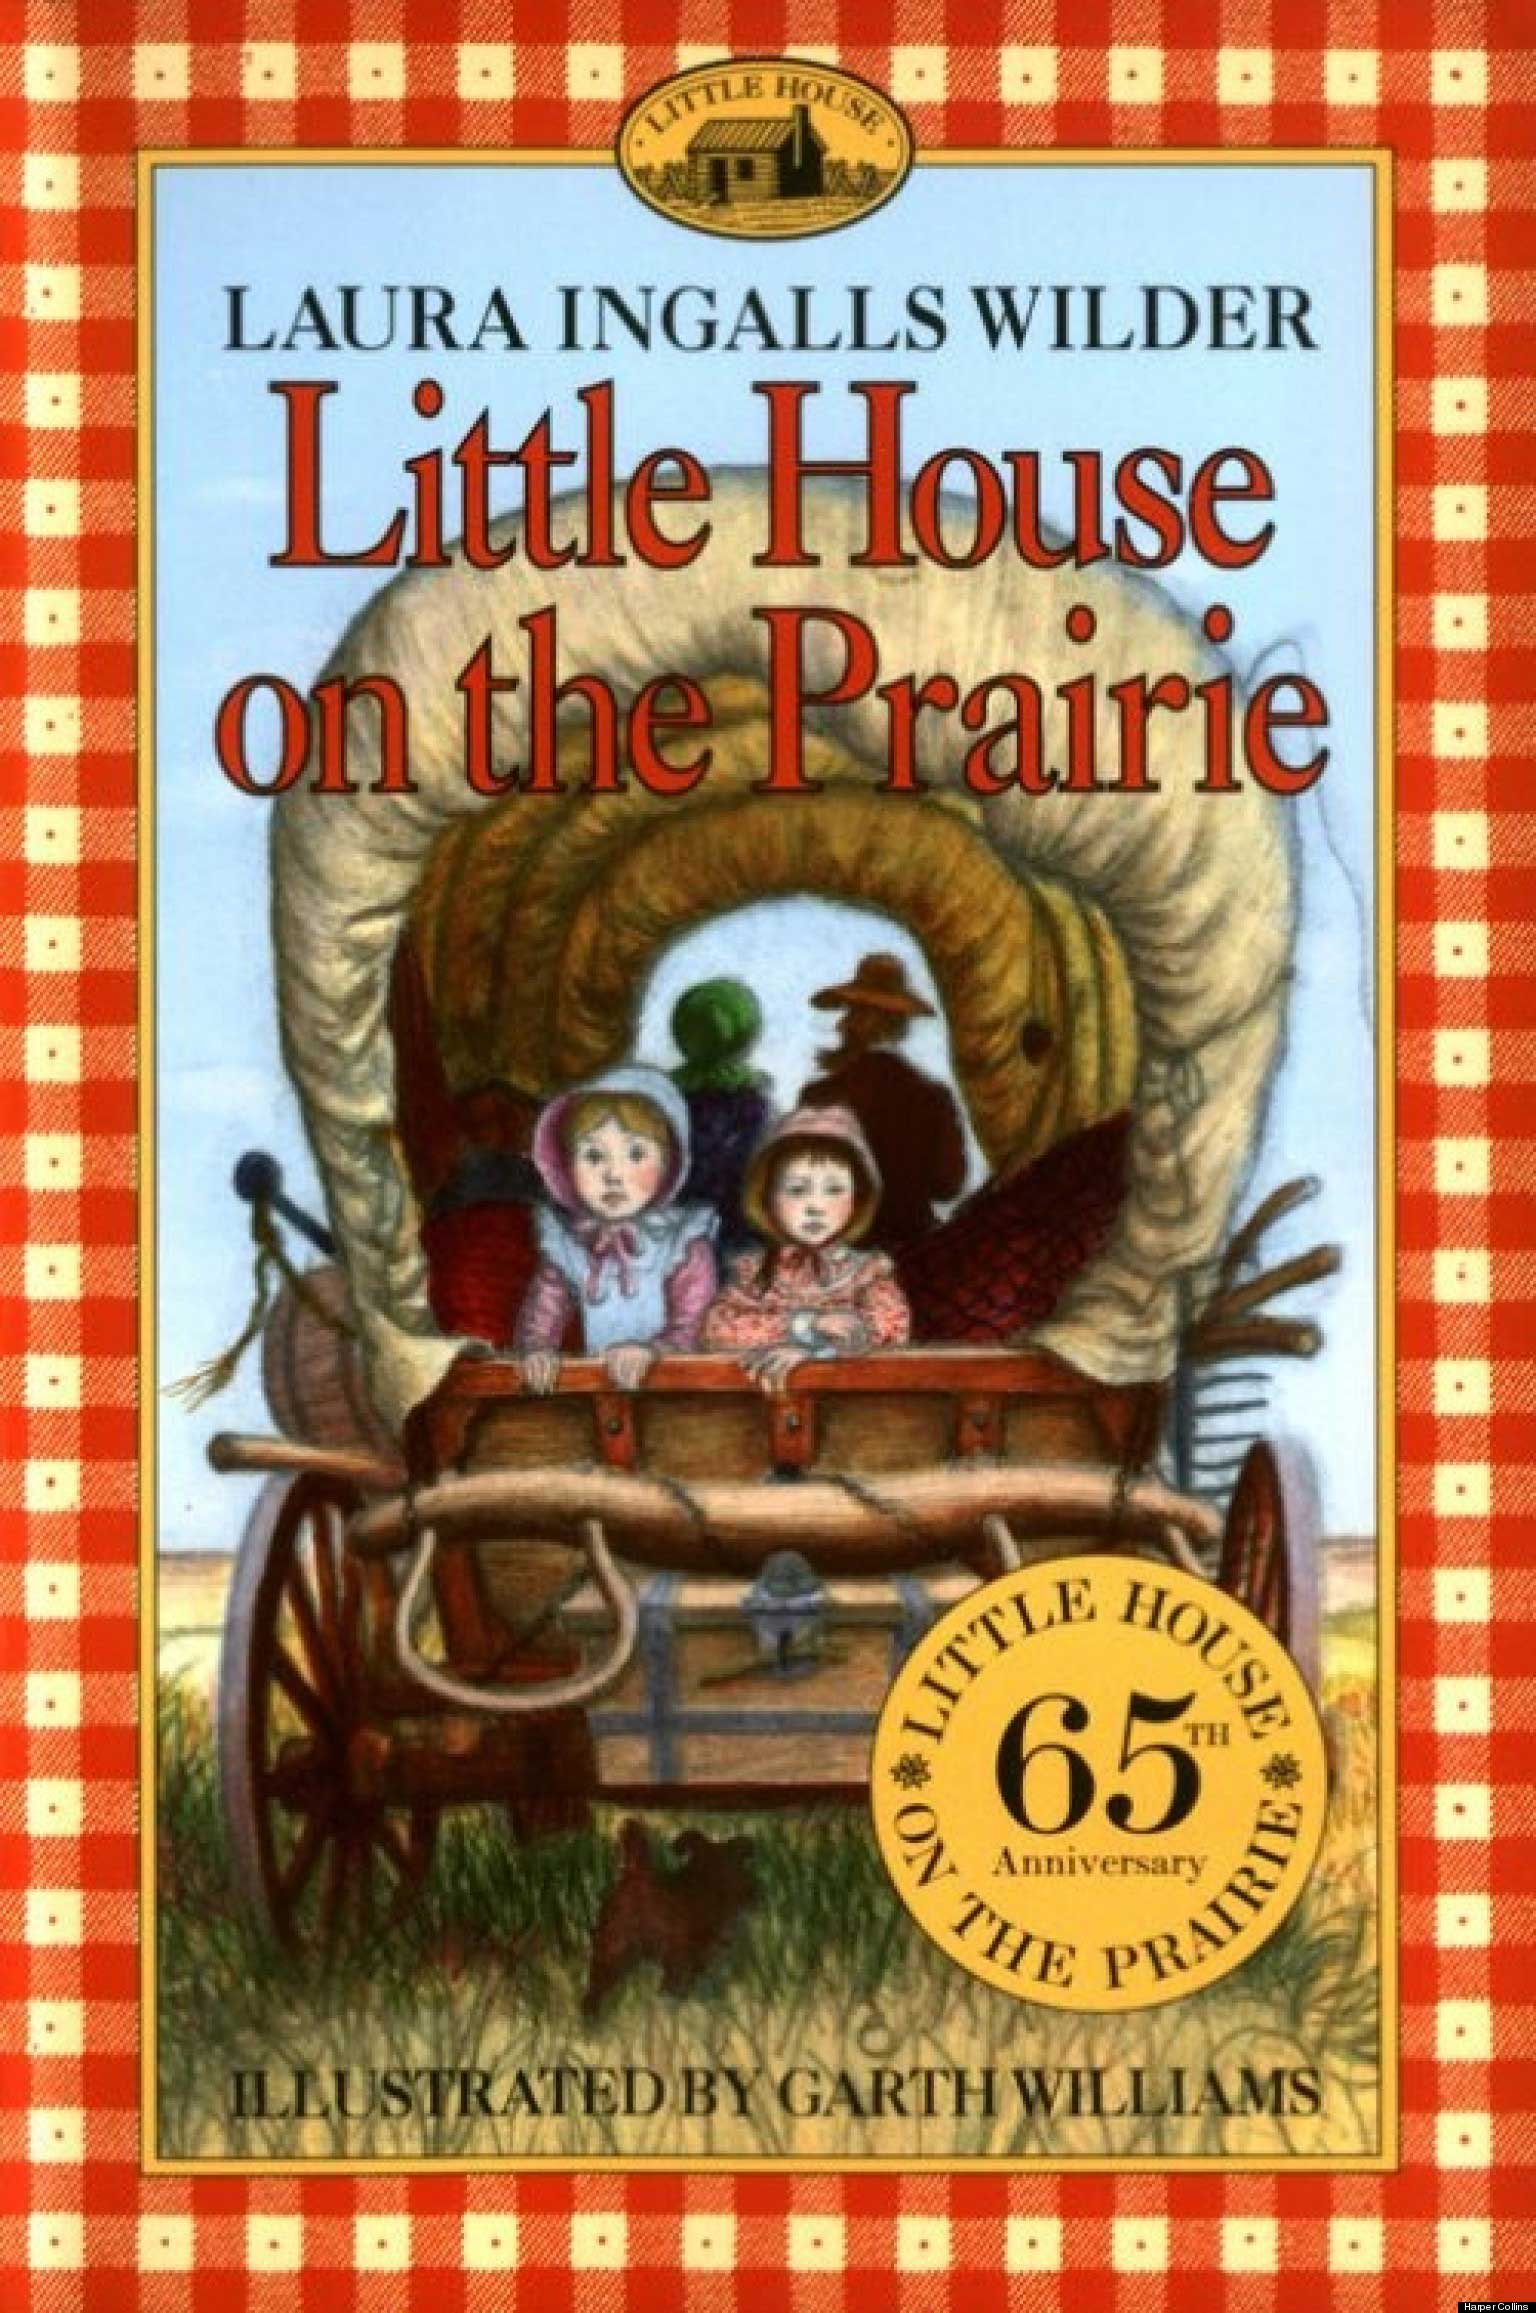 Little House on the Prairie (series), by Laura Ingalls Wilder. 
                              
                              
                              
                              The books that spawned a  literary and television franchise were based on Wilder’s own experience growing up in the Midwest in the late 19th century.
                              
                              
                              
                              Buy now: Little House on the Prairie (series)